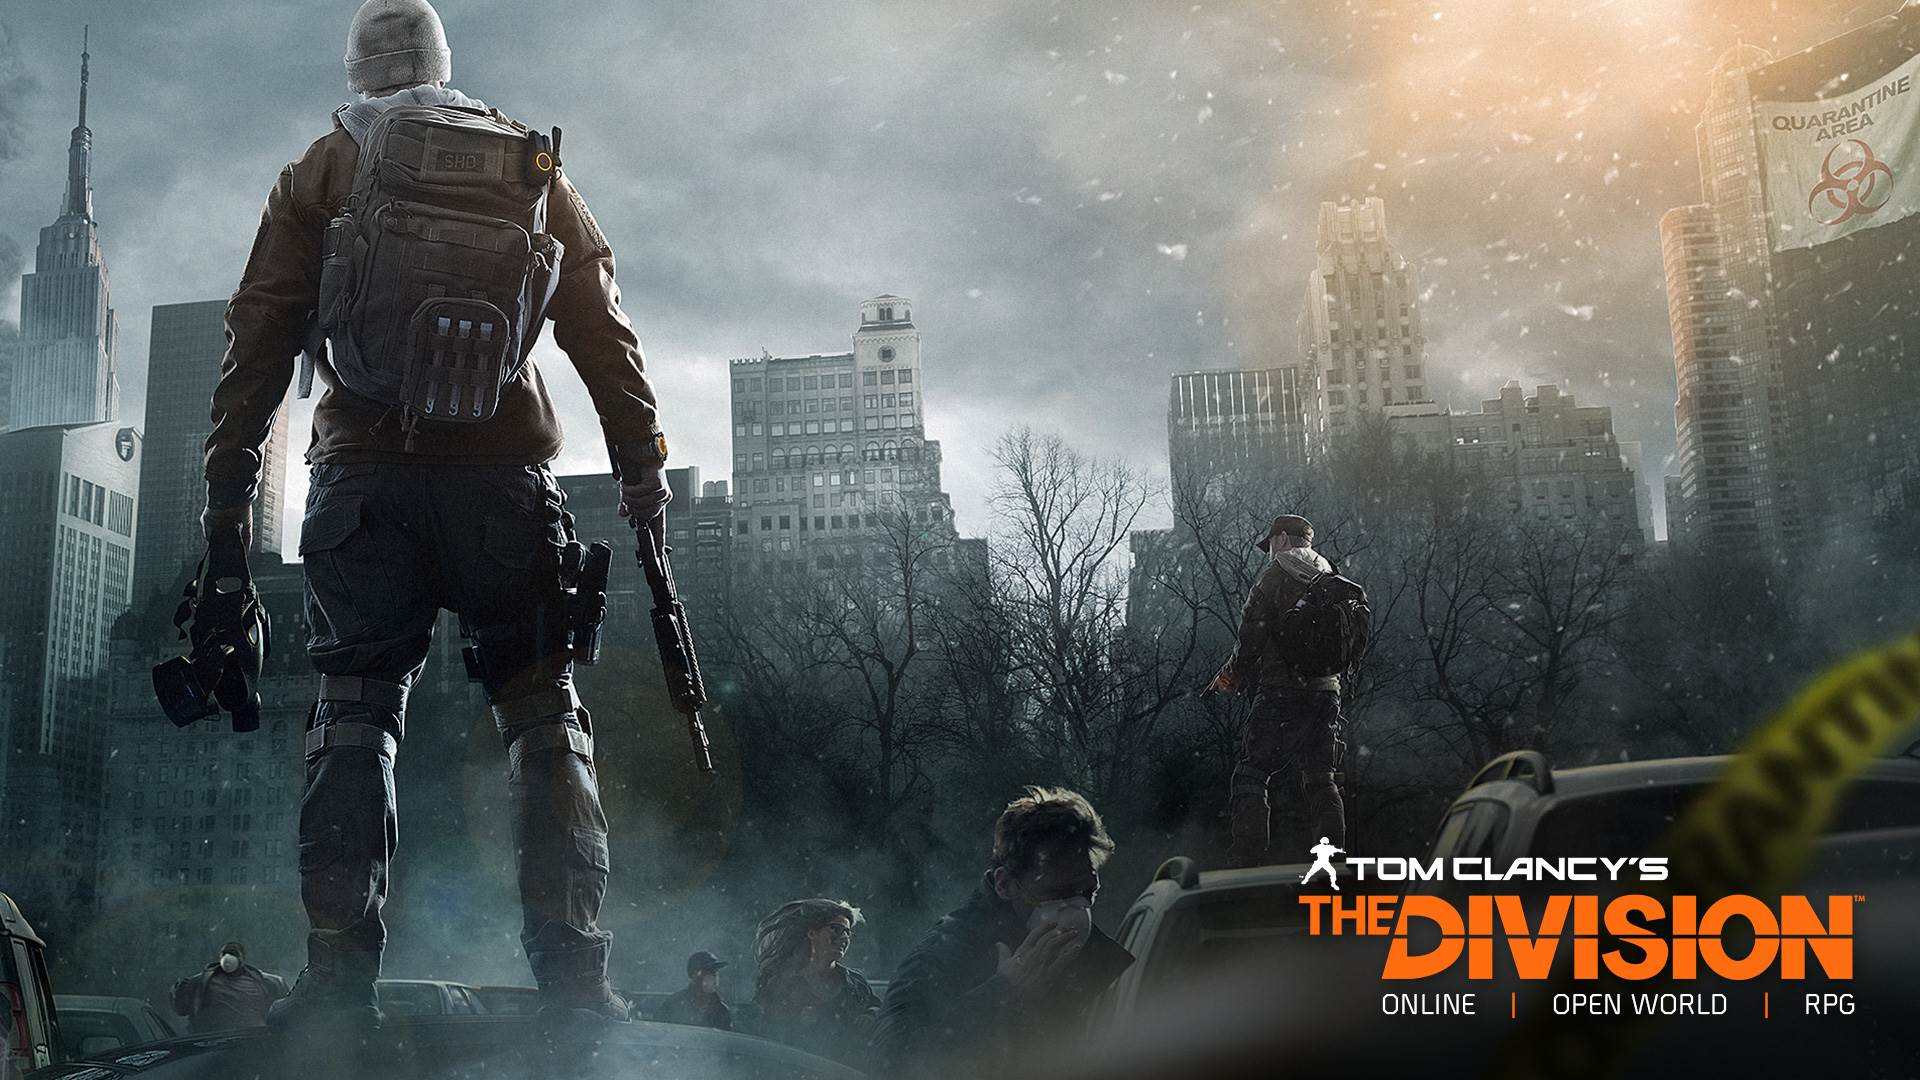 The Division Wallpapers in 1080P HD GamingBoltcom Video Game